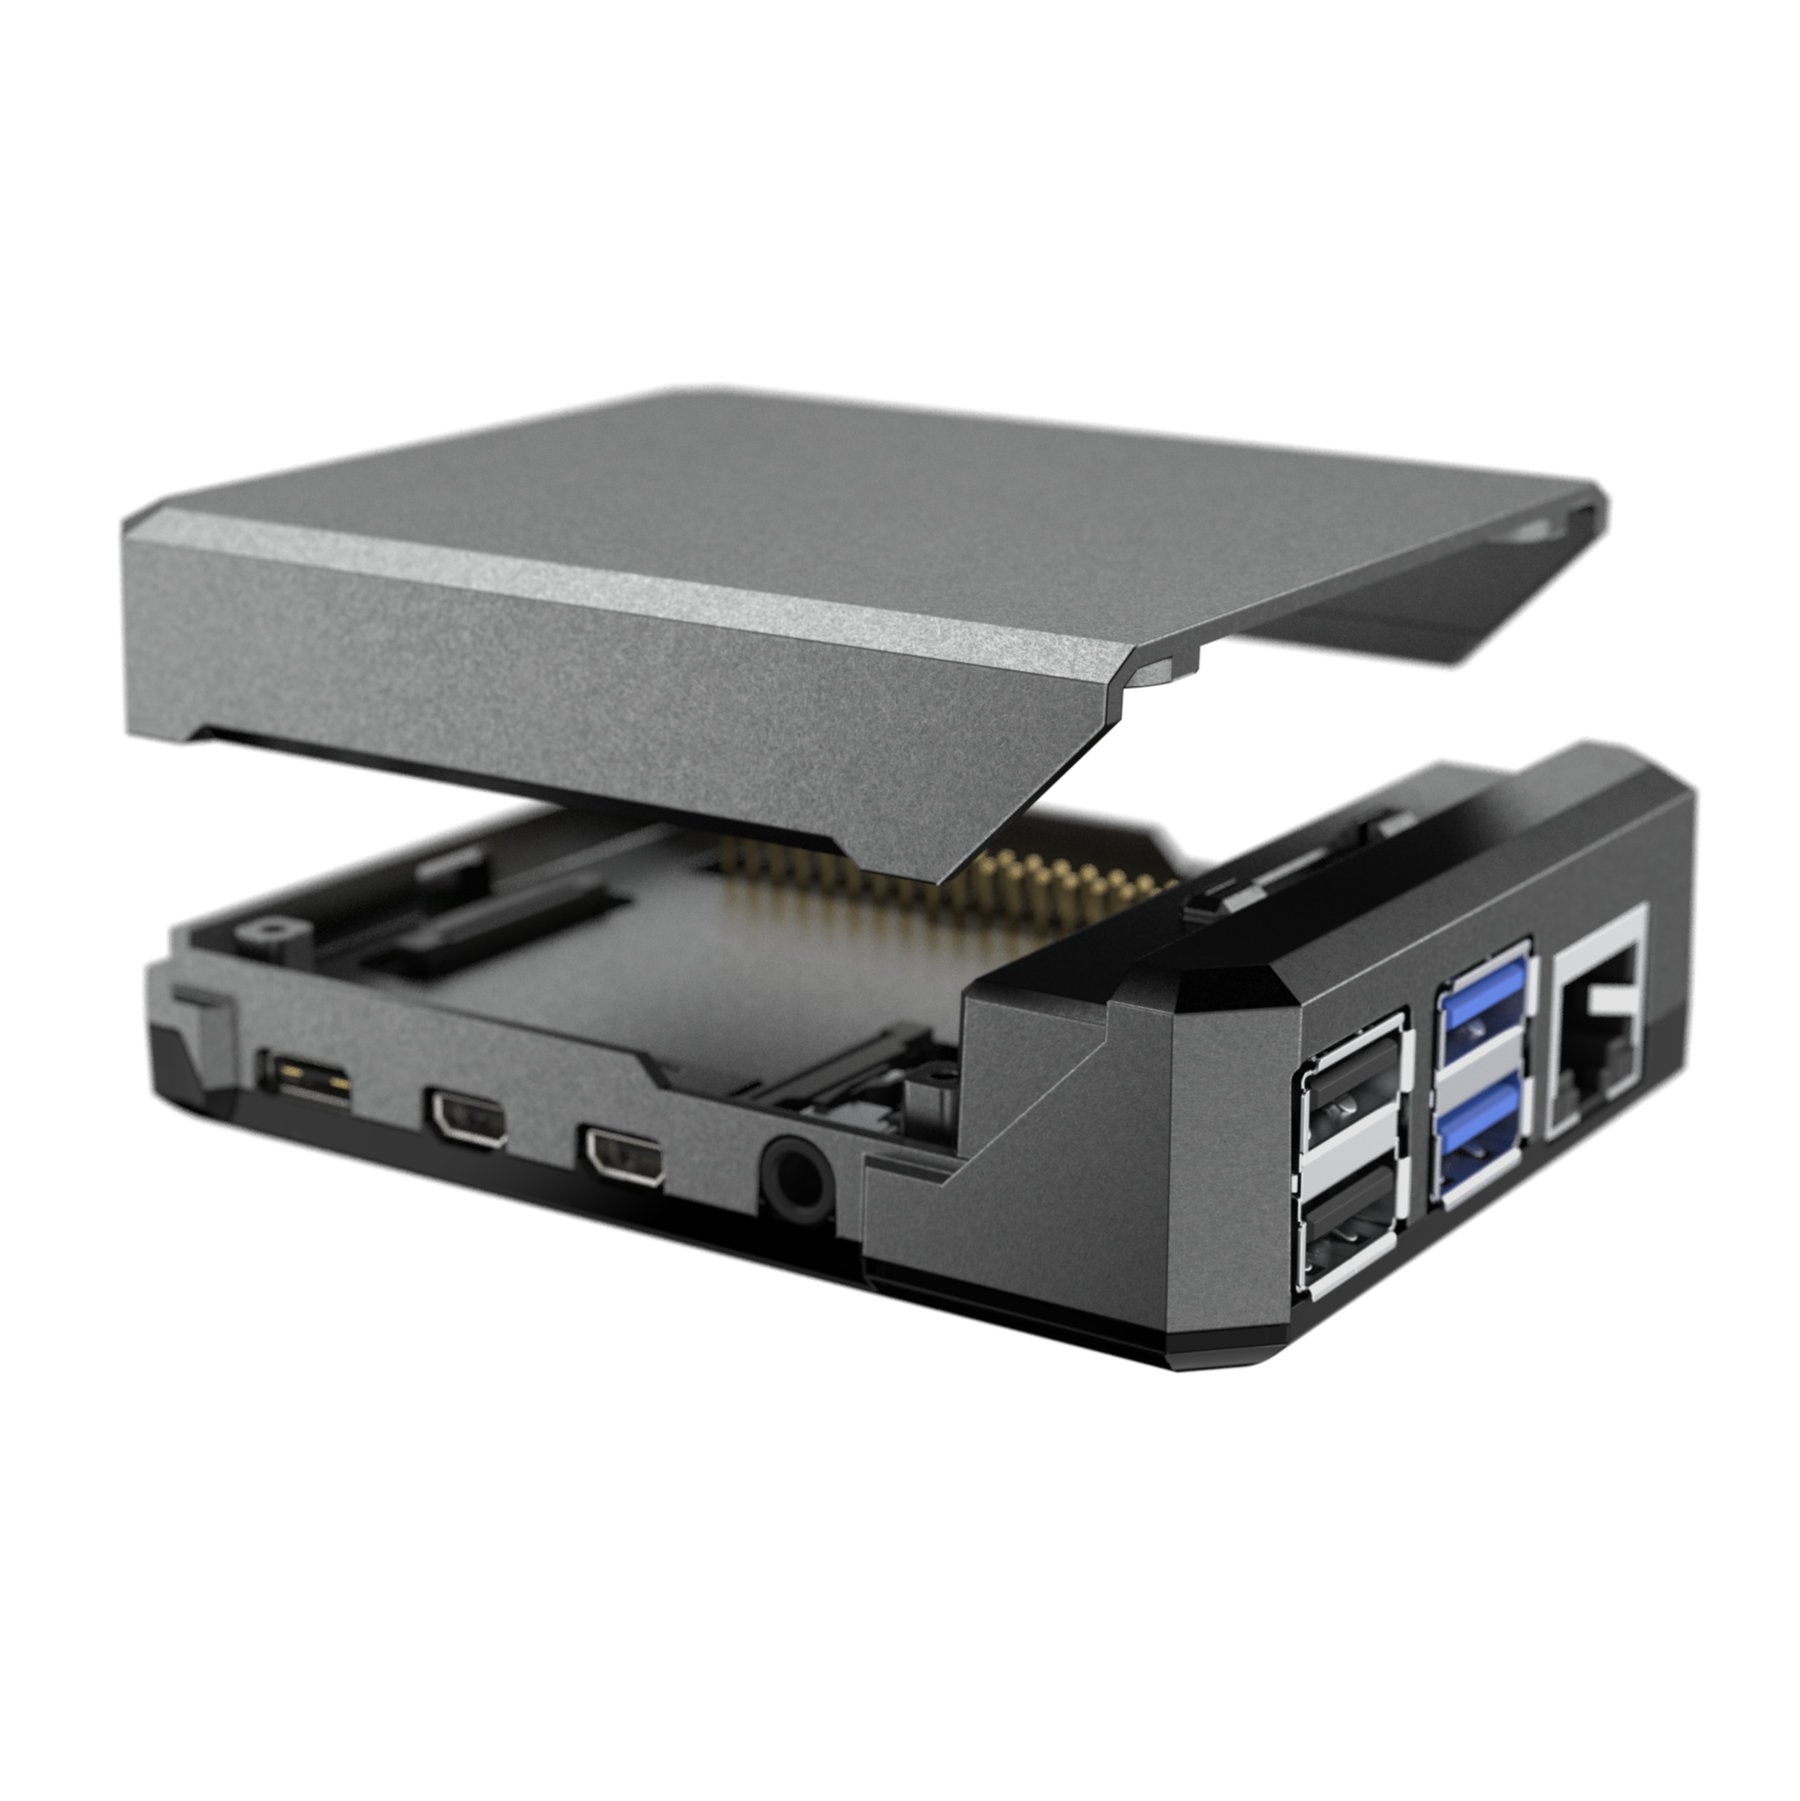 Argon NEO Raspberry Pi 4 Case - Buy and Sell Hardware Products, DIY  Electronics and Kits, HuaQiangBei Online Store - PCBWay